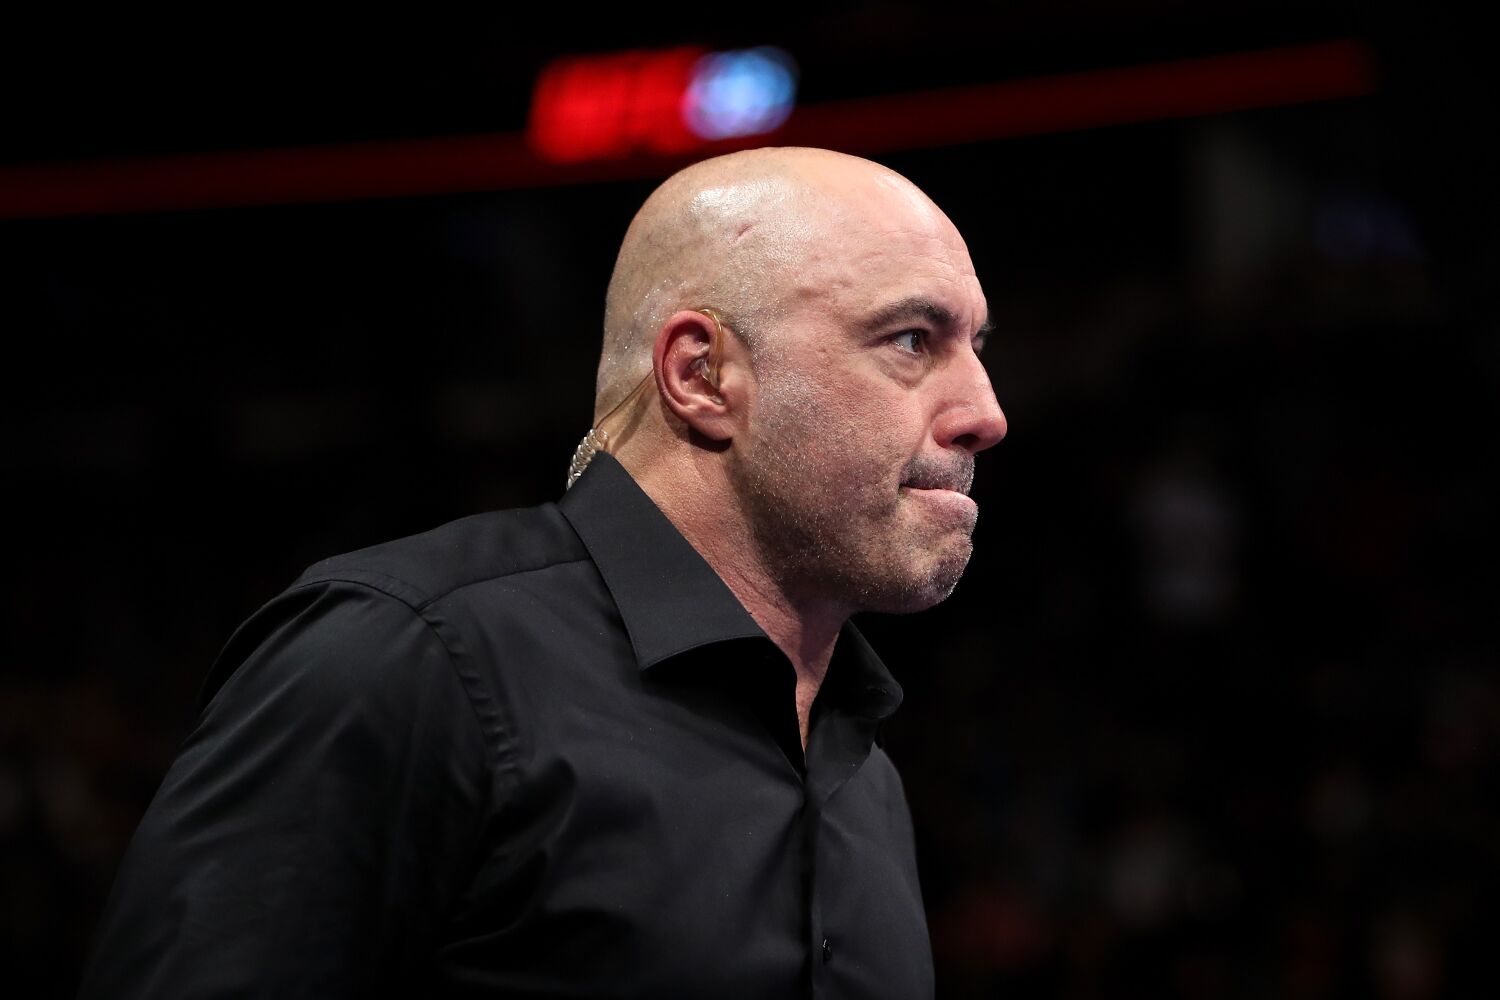 Joe Rogan apologizes for discussing doctored tweet on Spotify podcast